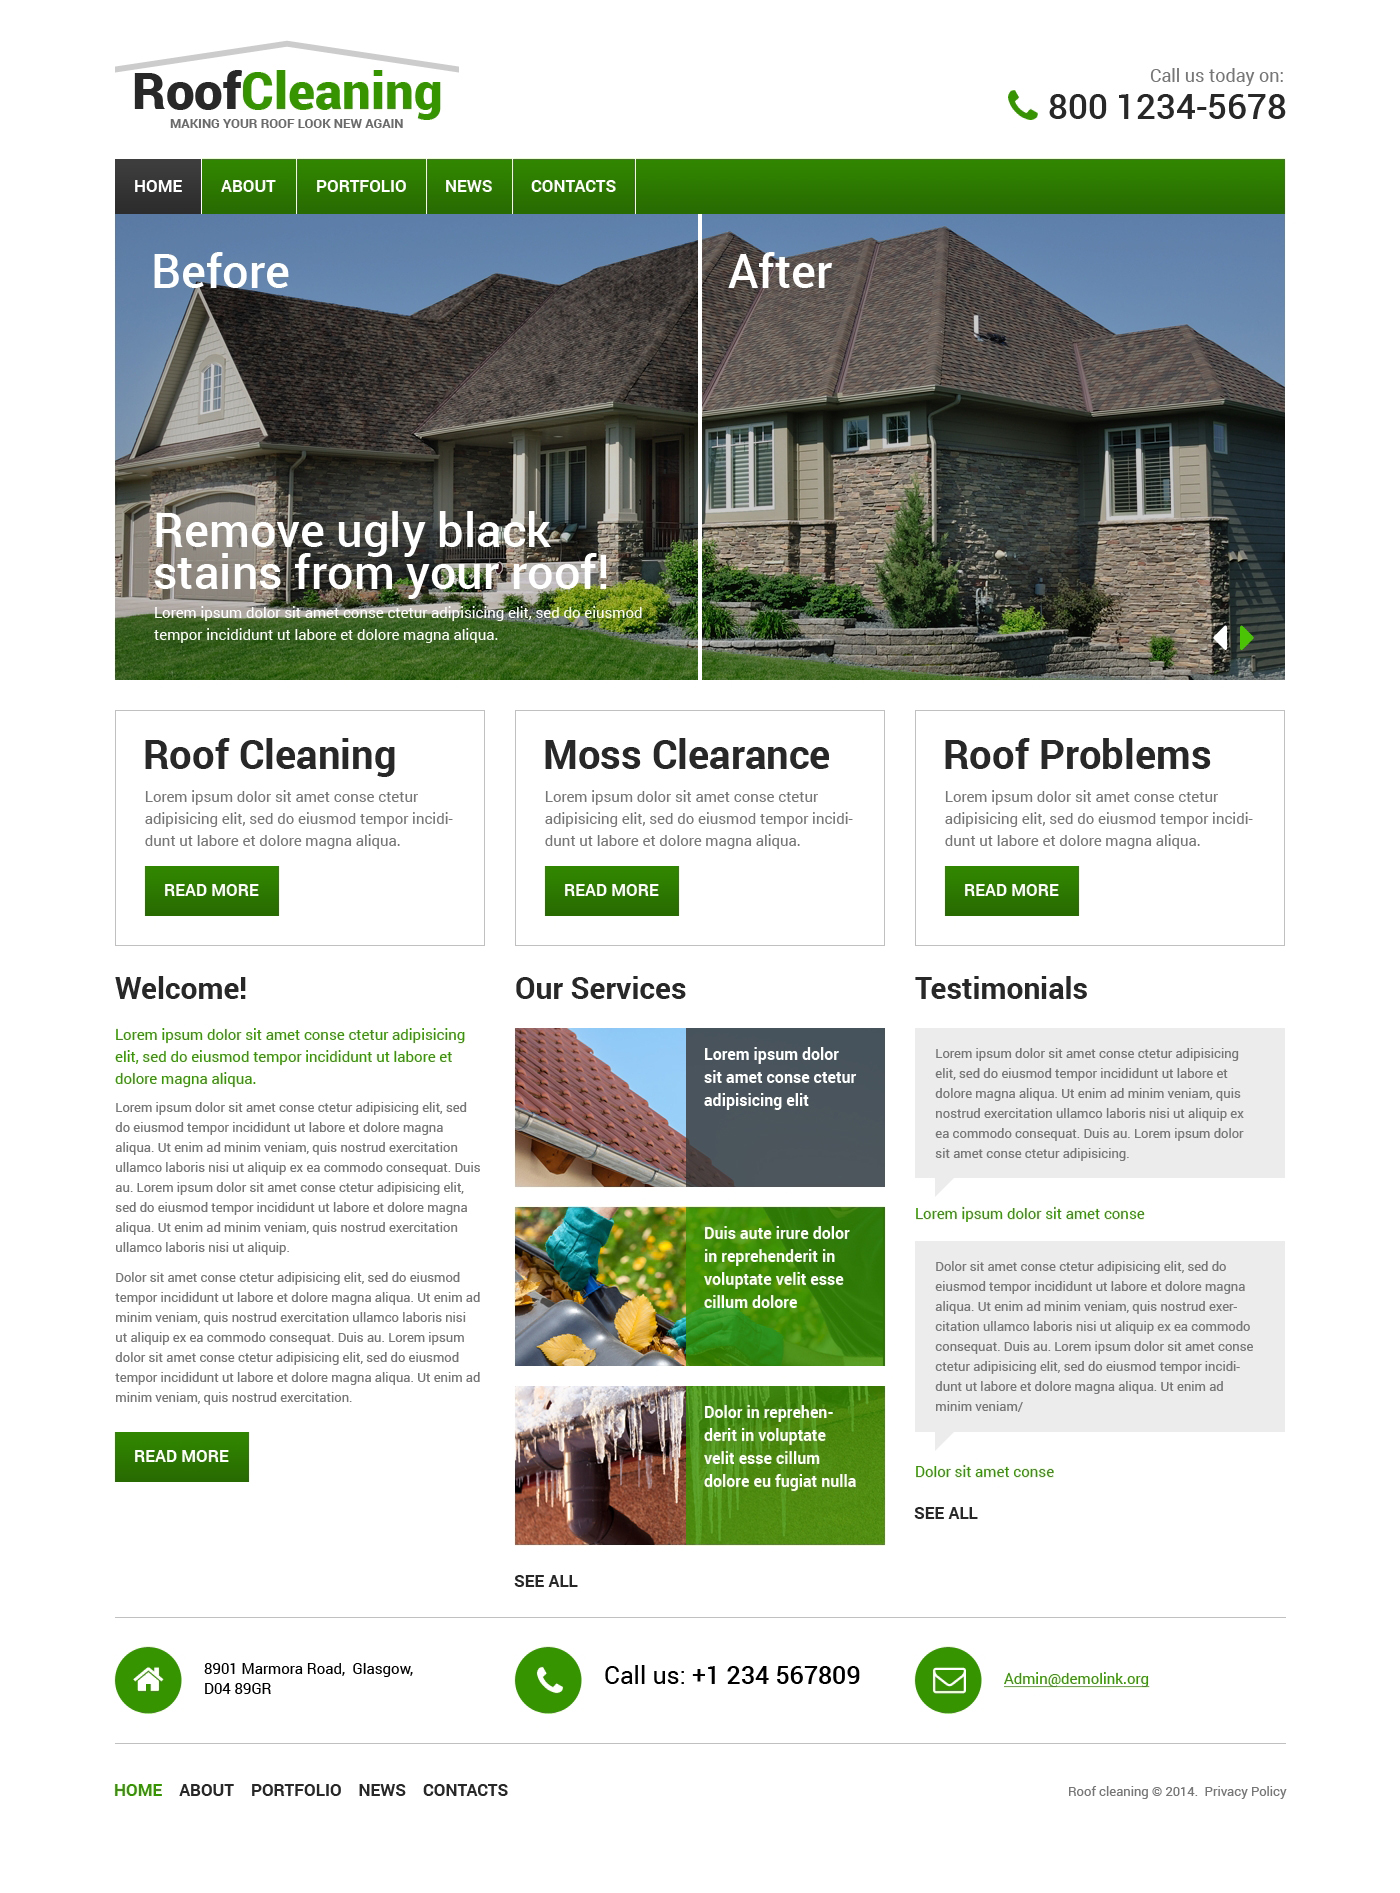 Roofing Company Drupal Template